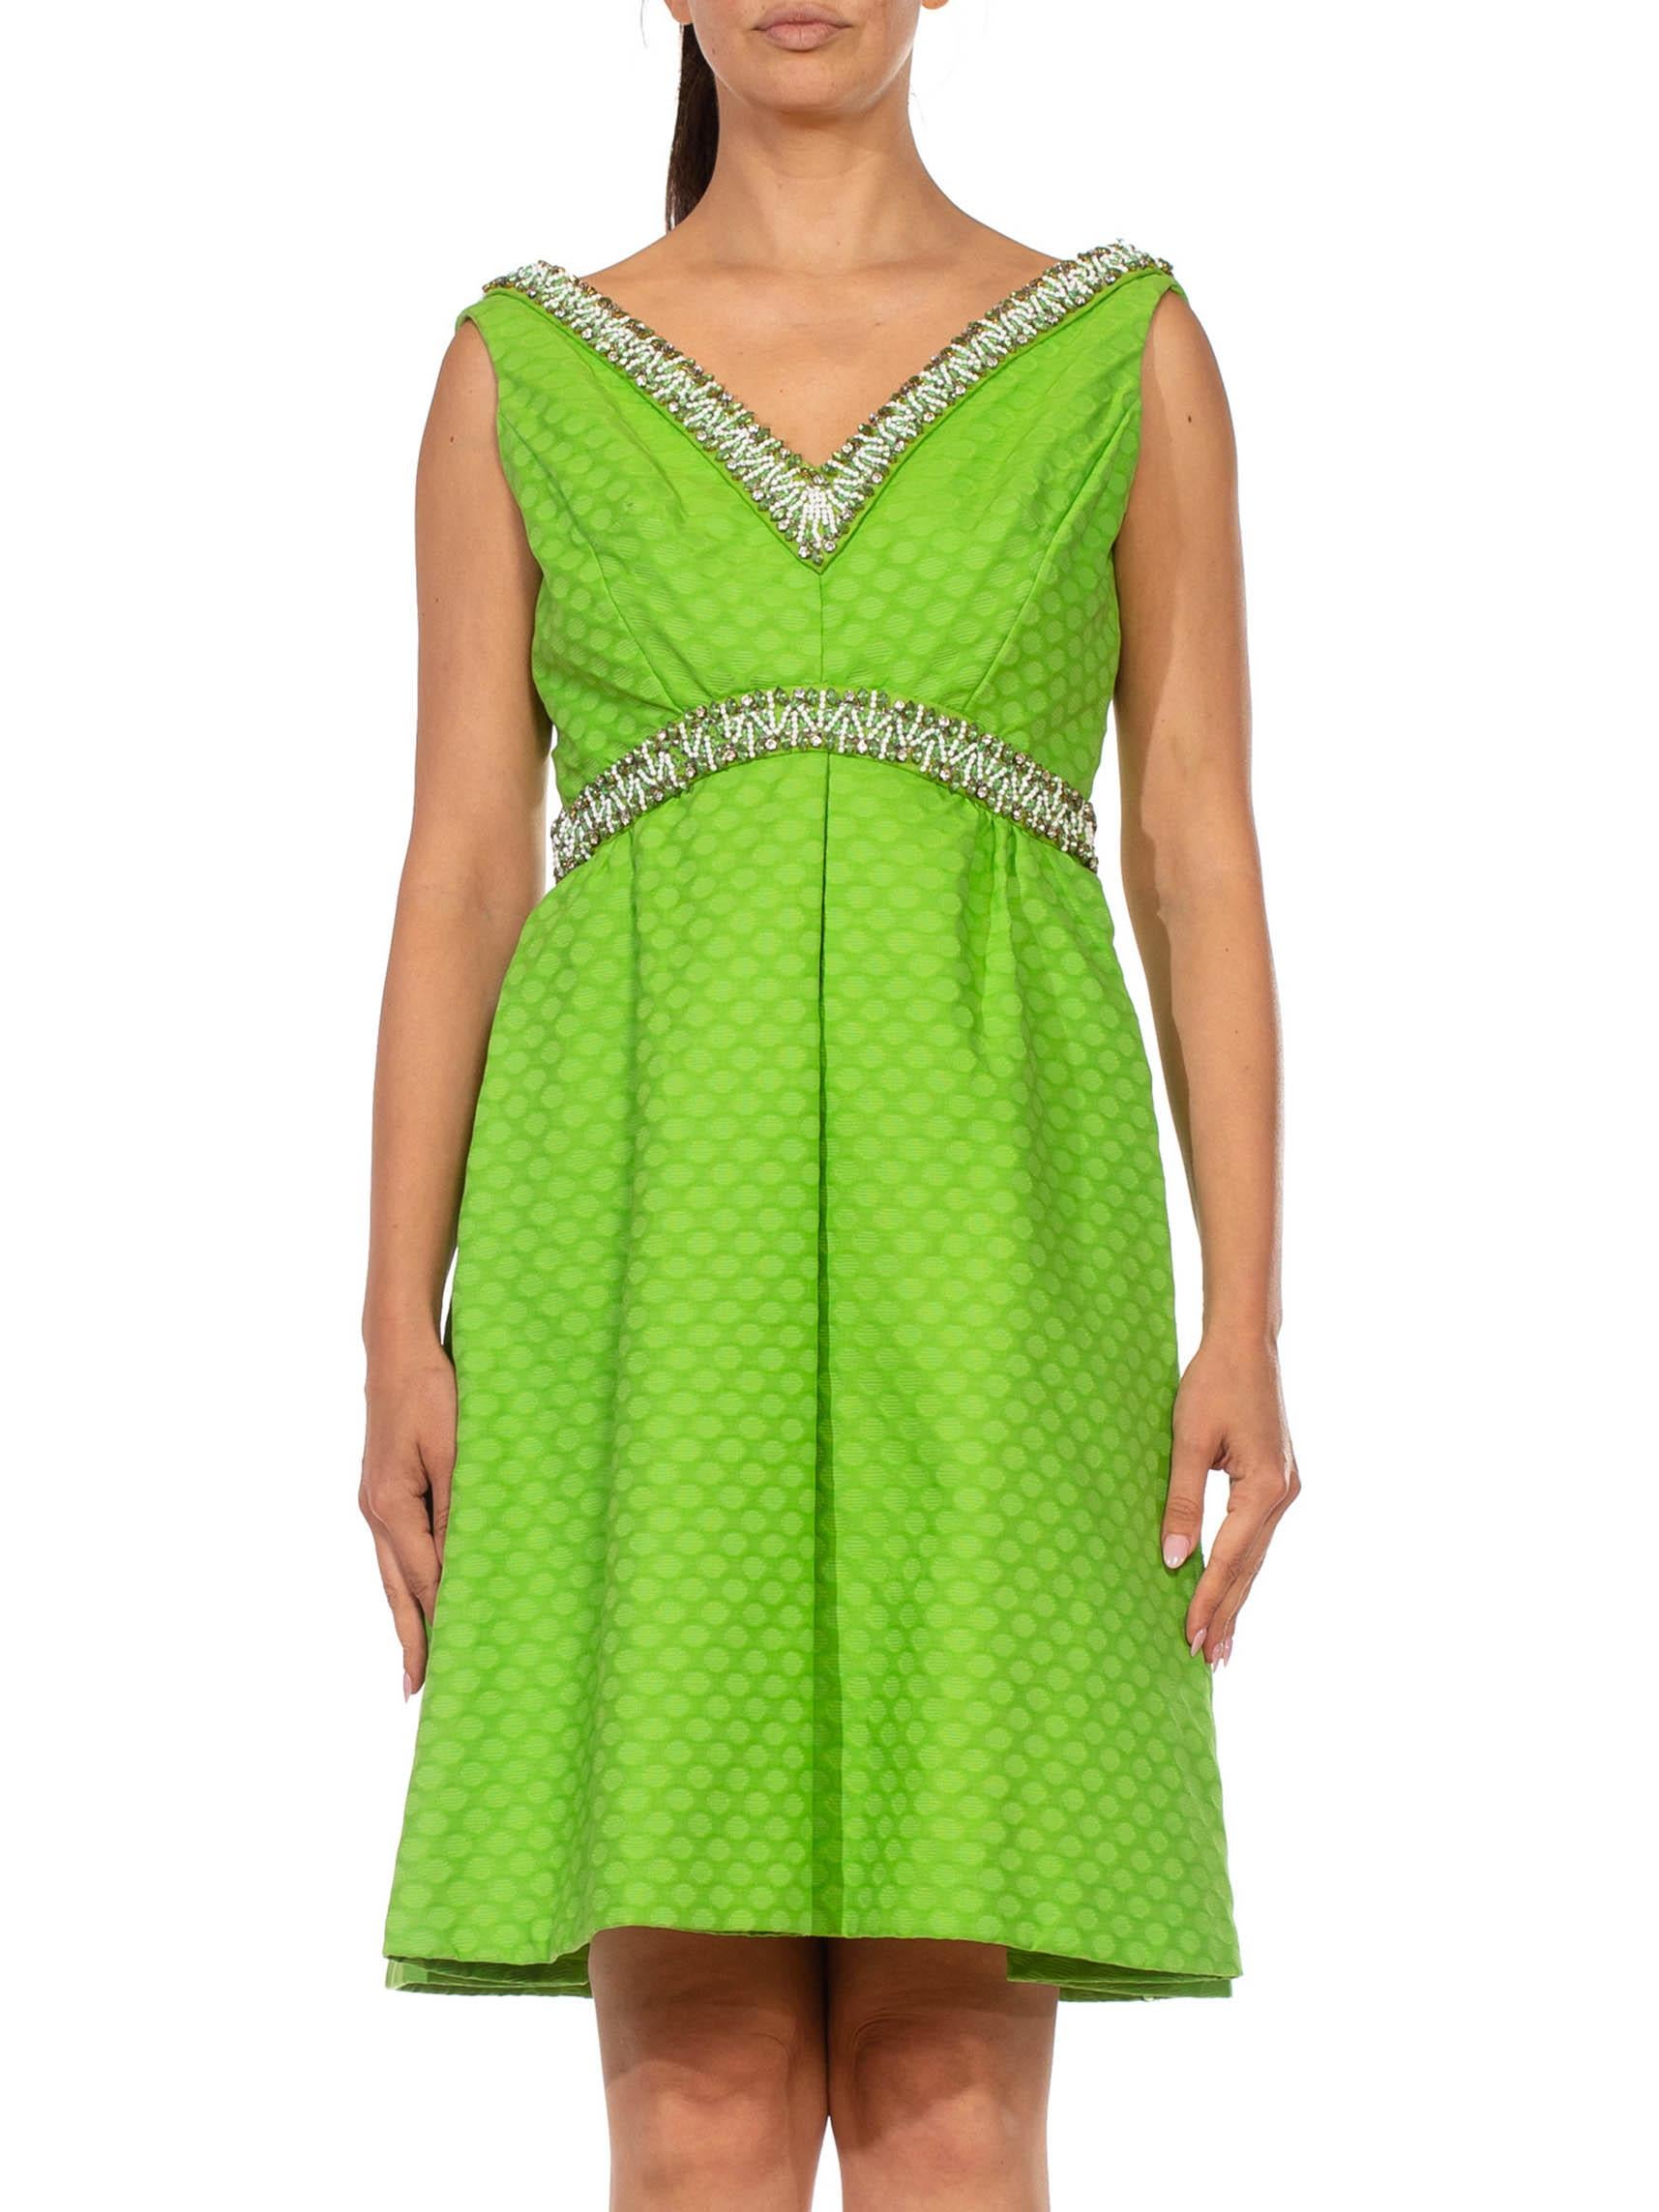 1960S Lime Green Cotton Jacquard Cocktail Dress With Beaded Neckline And Waist For Sale 4